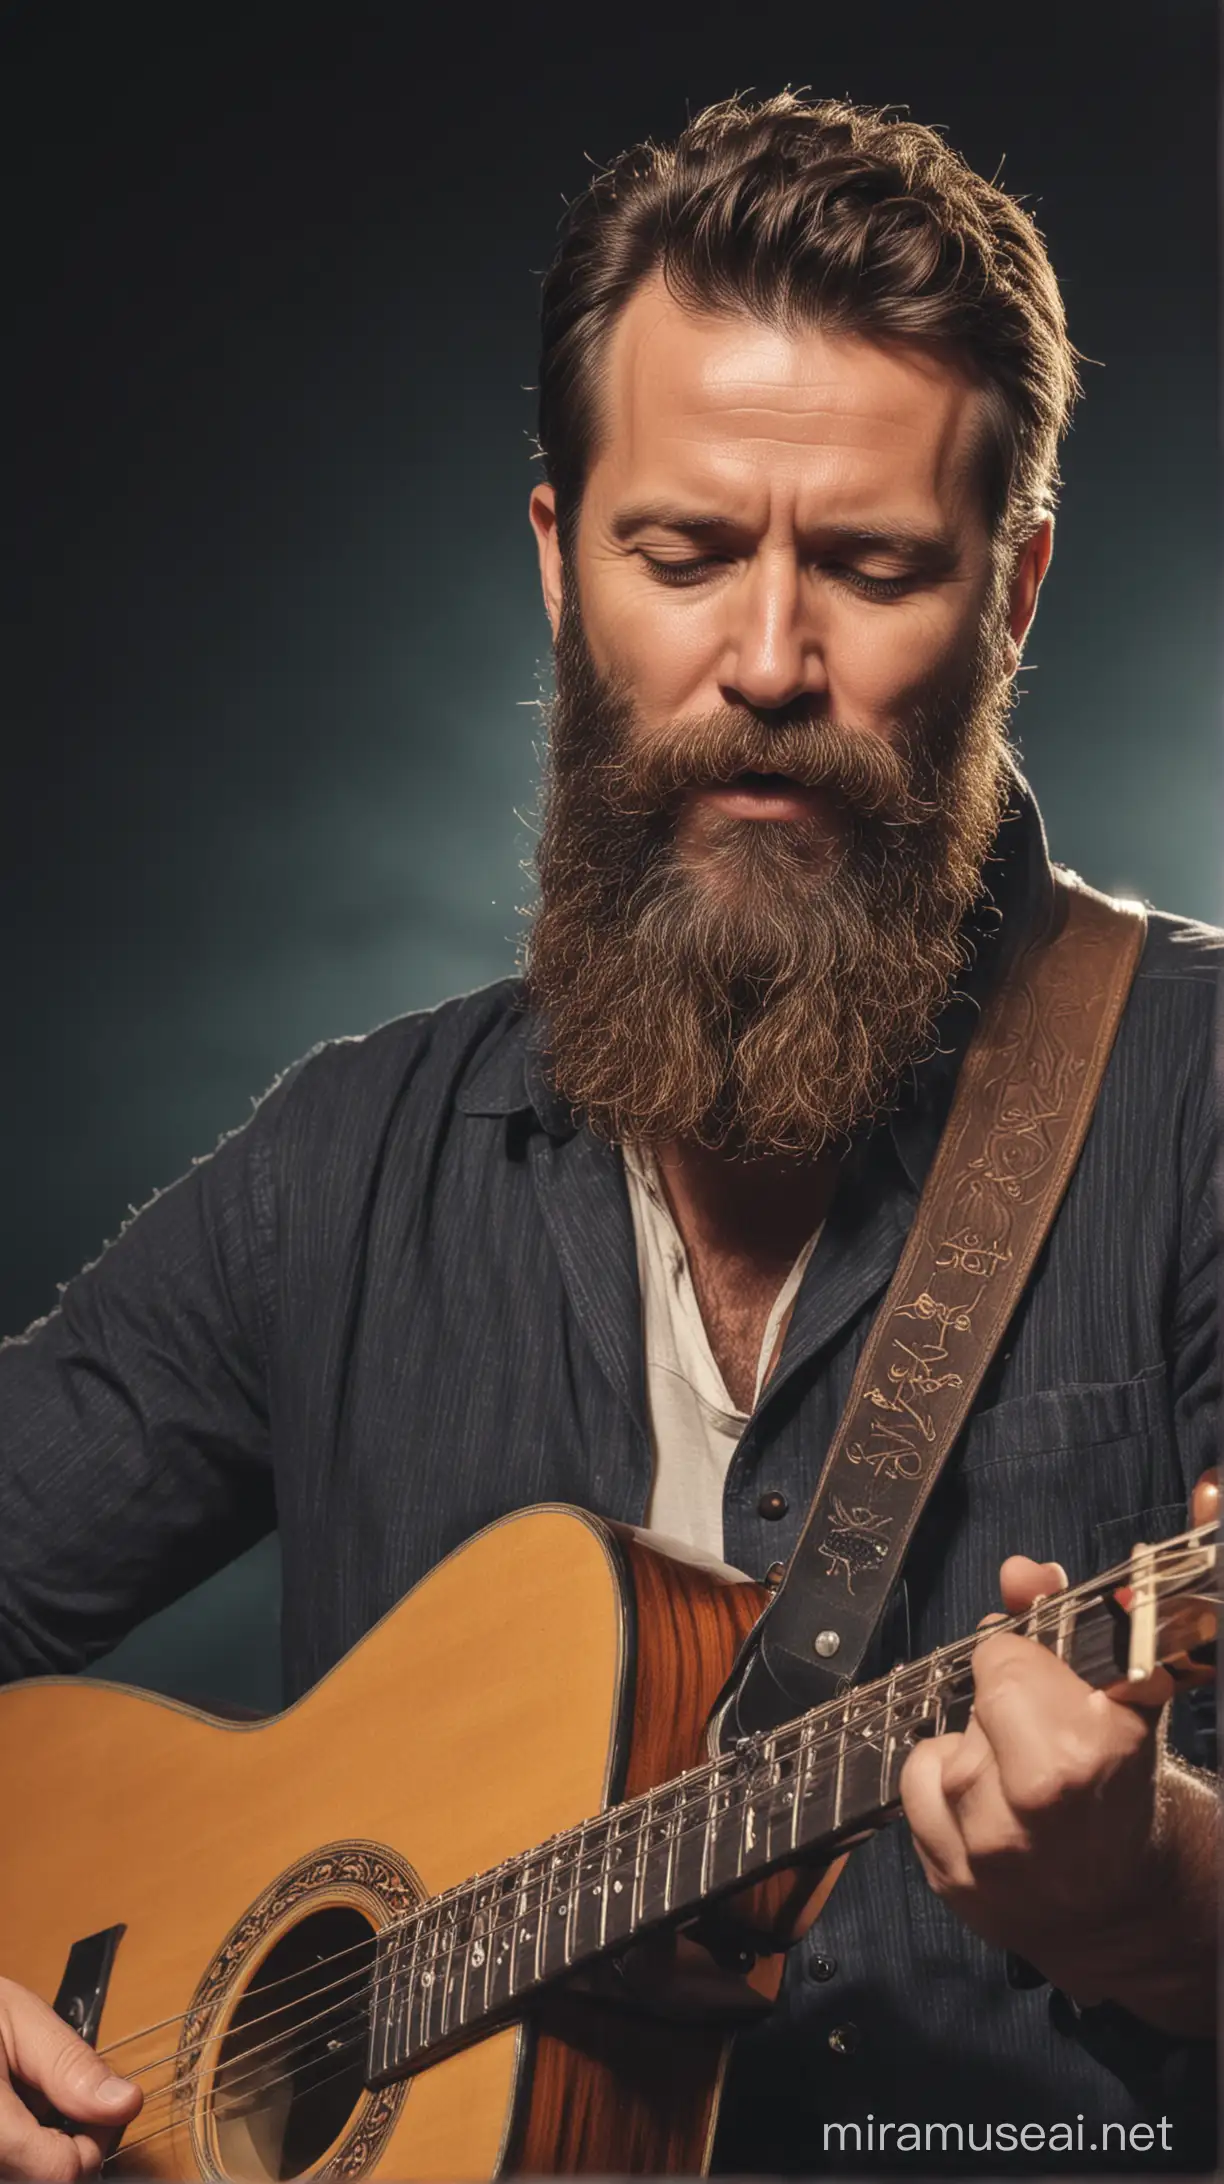 Bearded Man Performing Live Guitar Concert at 46 Years Old